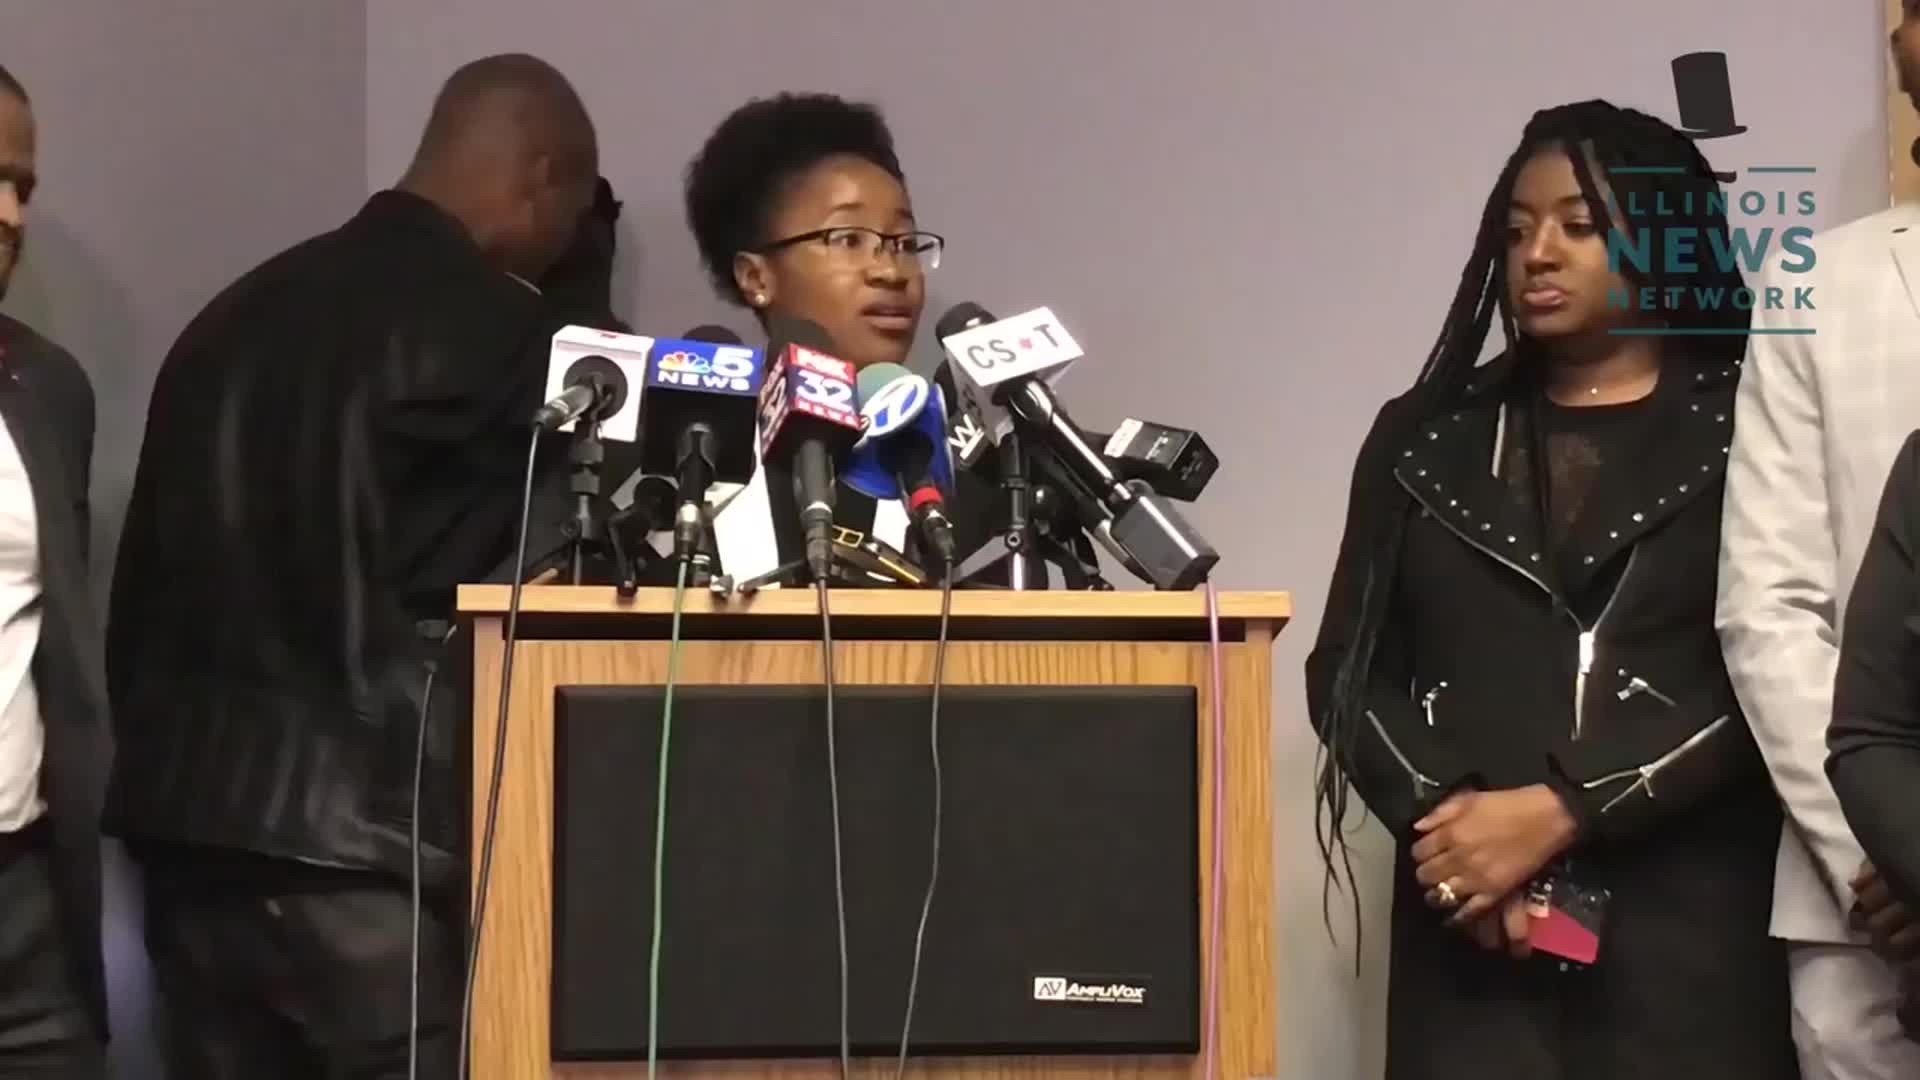 "Civil rights is not a political hot potato" - prosecuting lawyer on Pritzker case